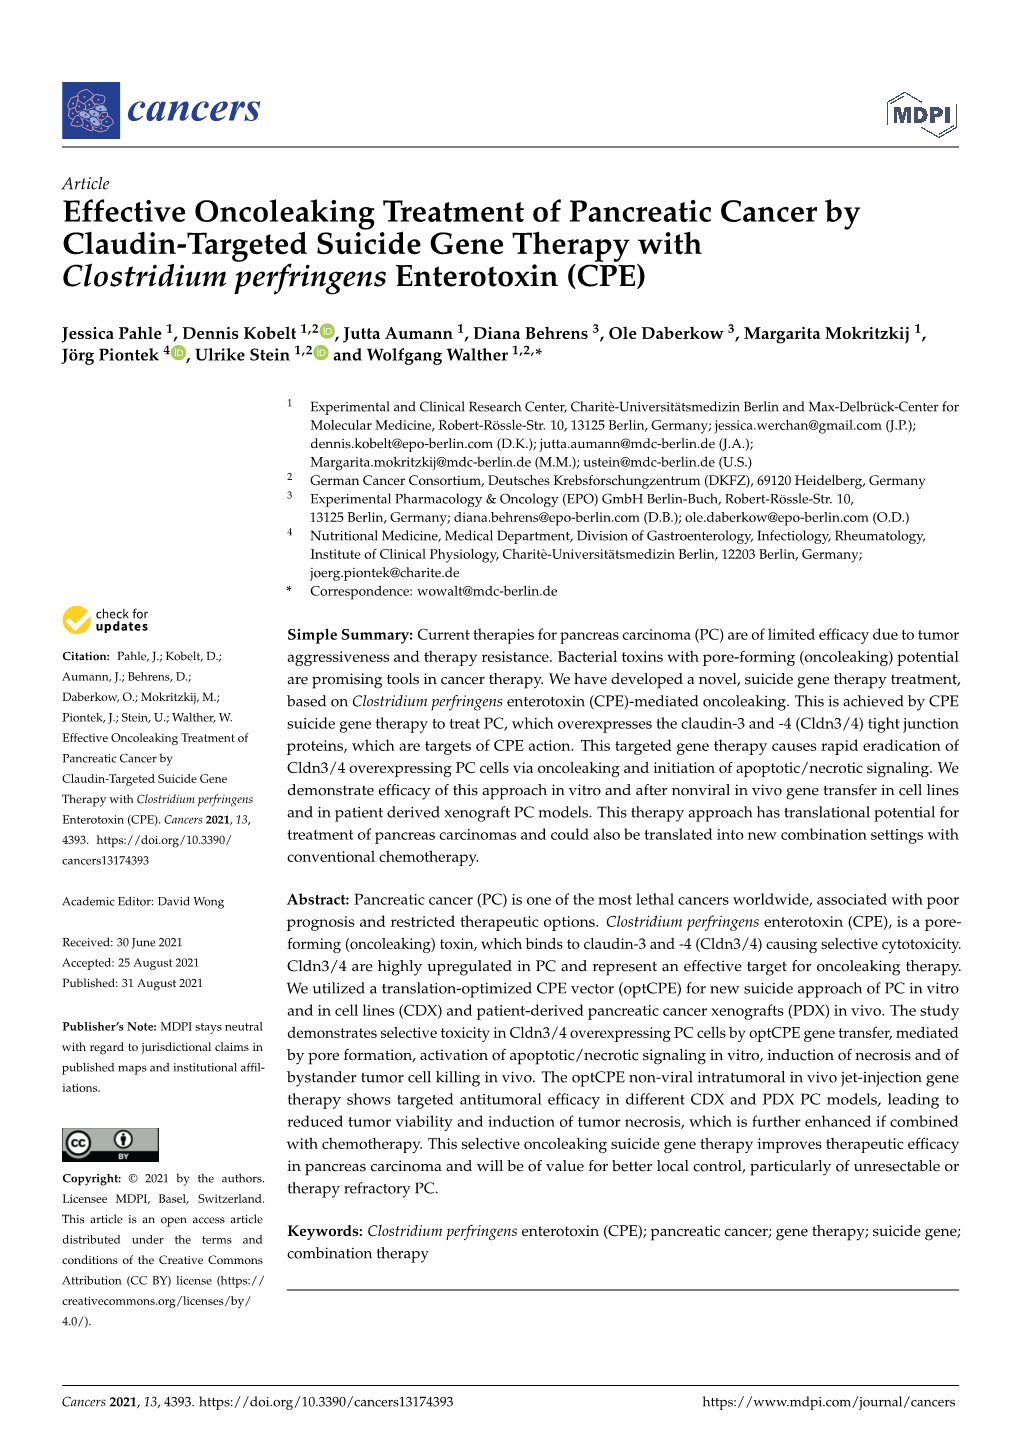 Effective Oncoleaking Treatment of Pancreatic Cancer by Claudin-Targeted Suicide Gene Therapy with Clostridium Perfringens Enterotoxin (CPE)